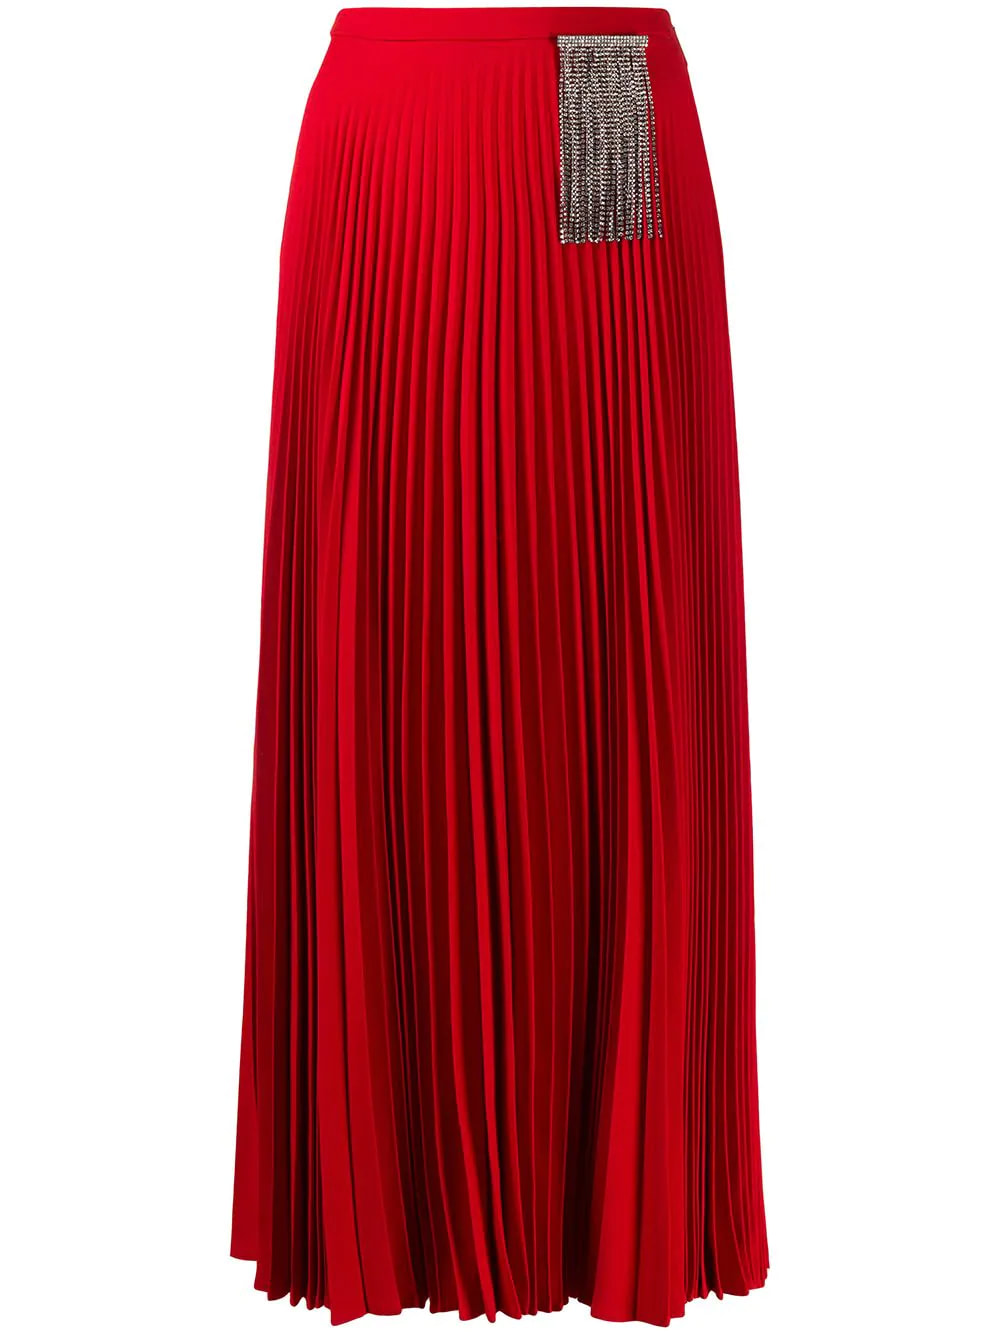 Christopher Kane crystal-embellished pleated skirt in red